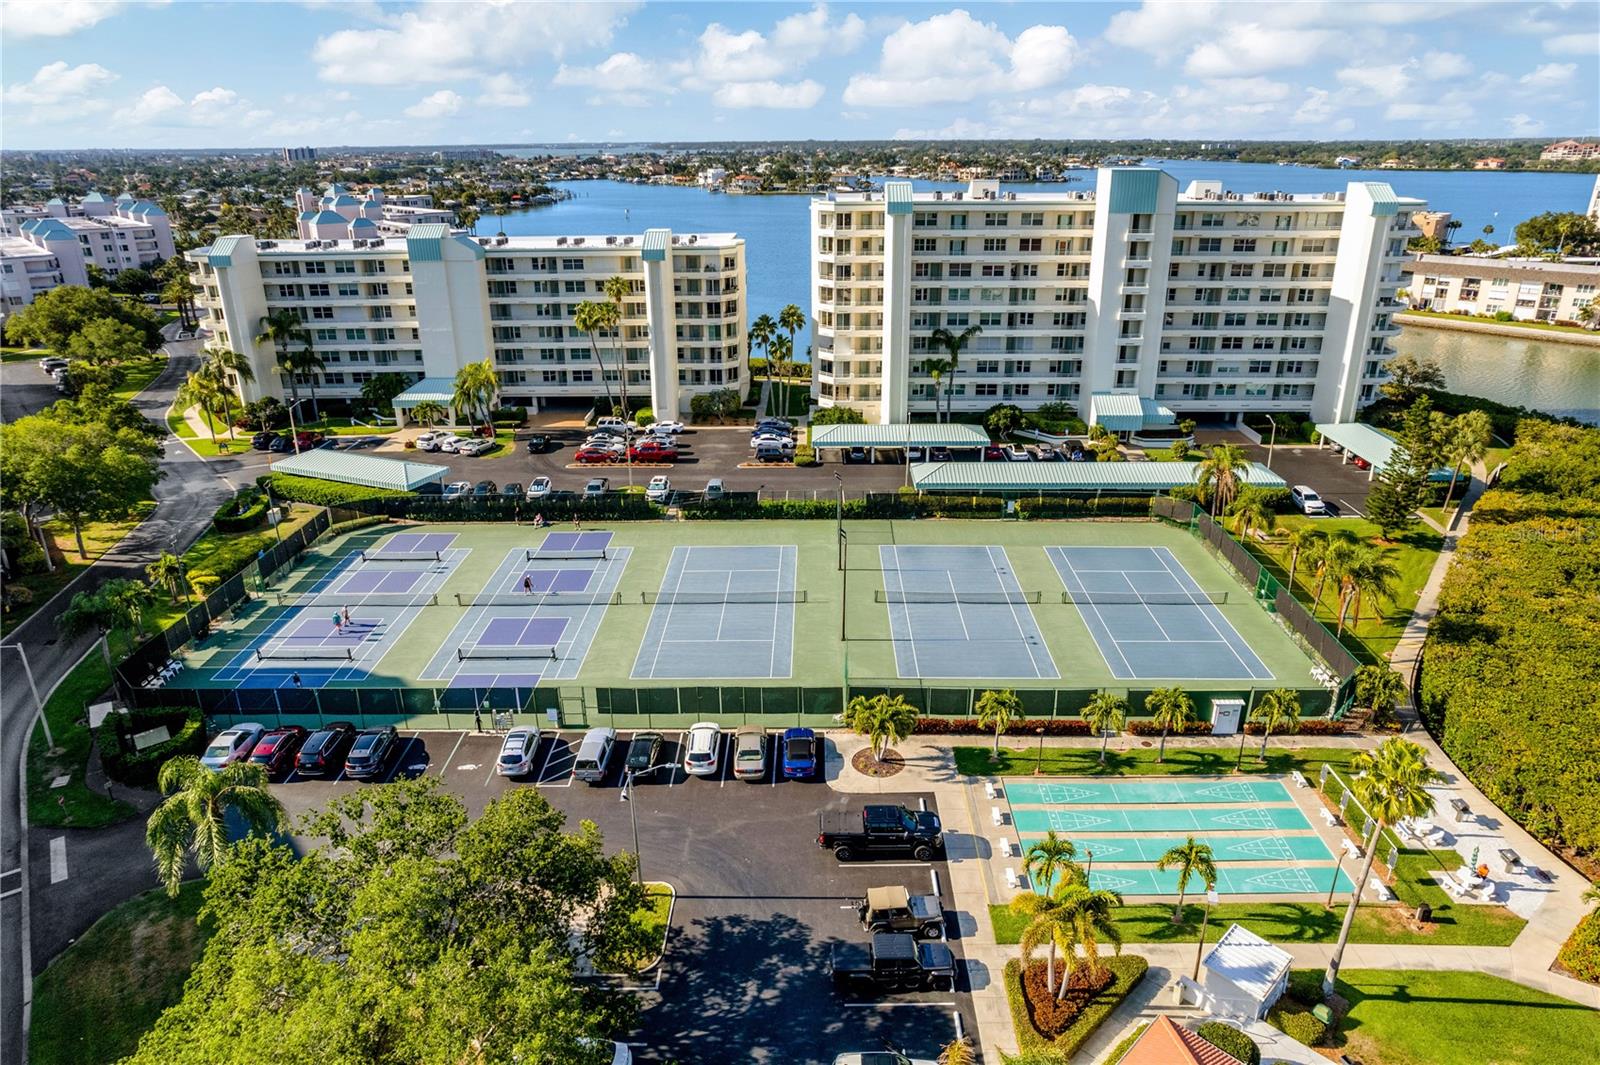 Shuffleboard, Tennis and Pickleball Courts for Residents.